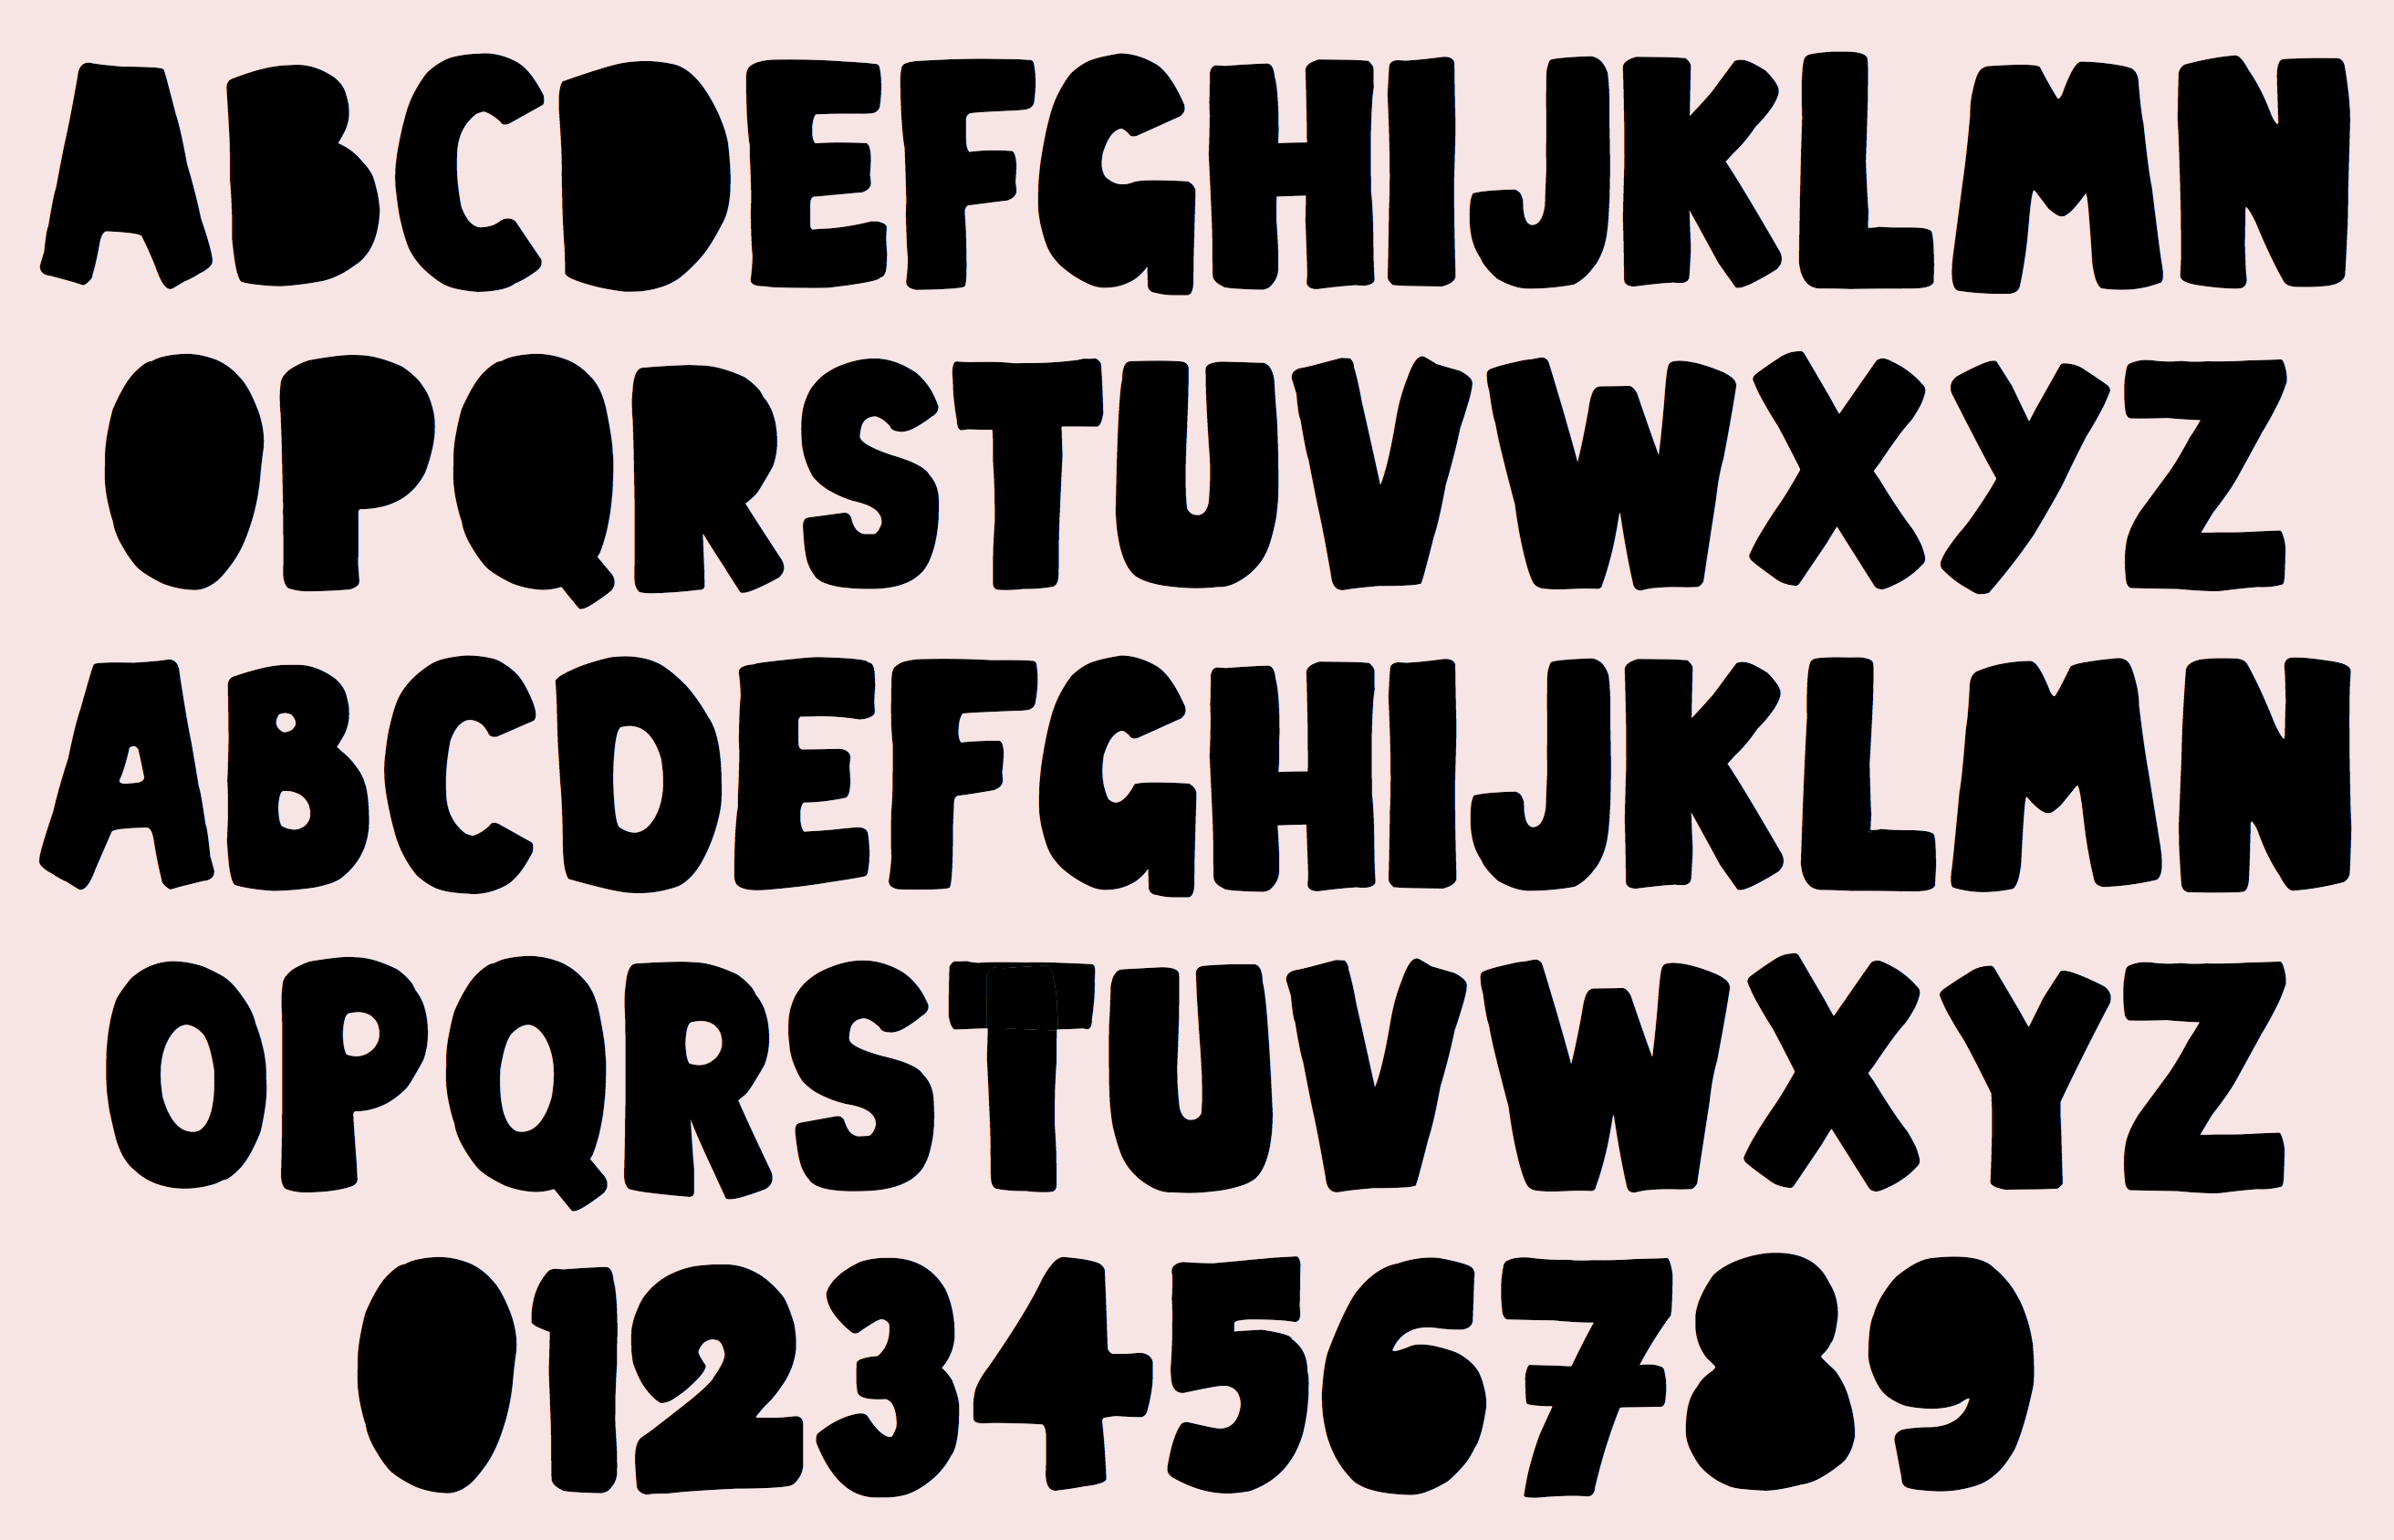 TypEx II font - from experimental font family by Ochakov